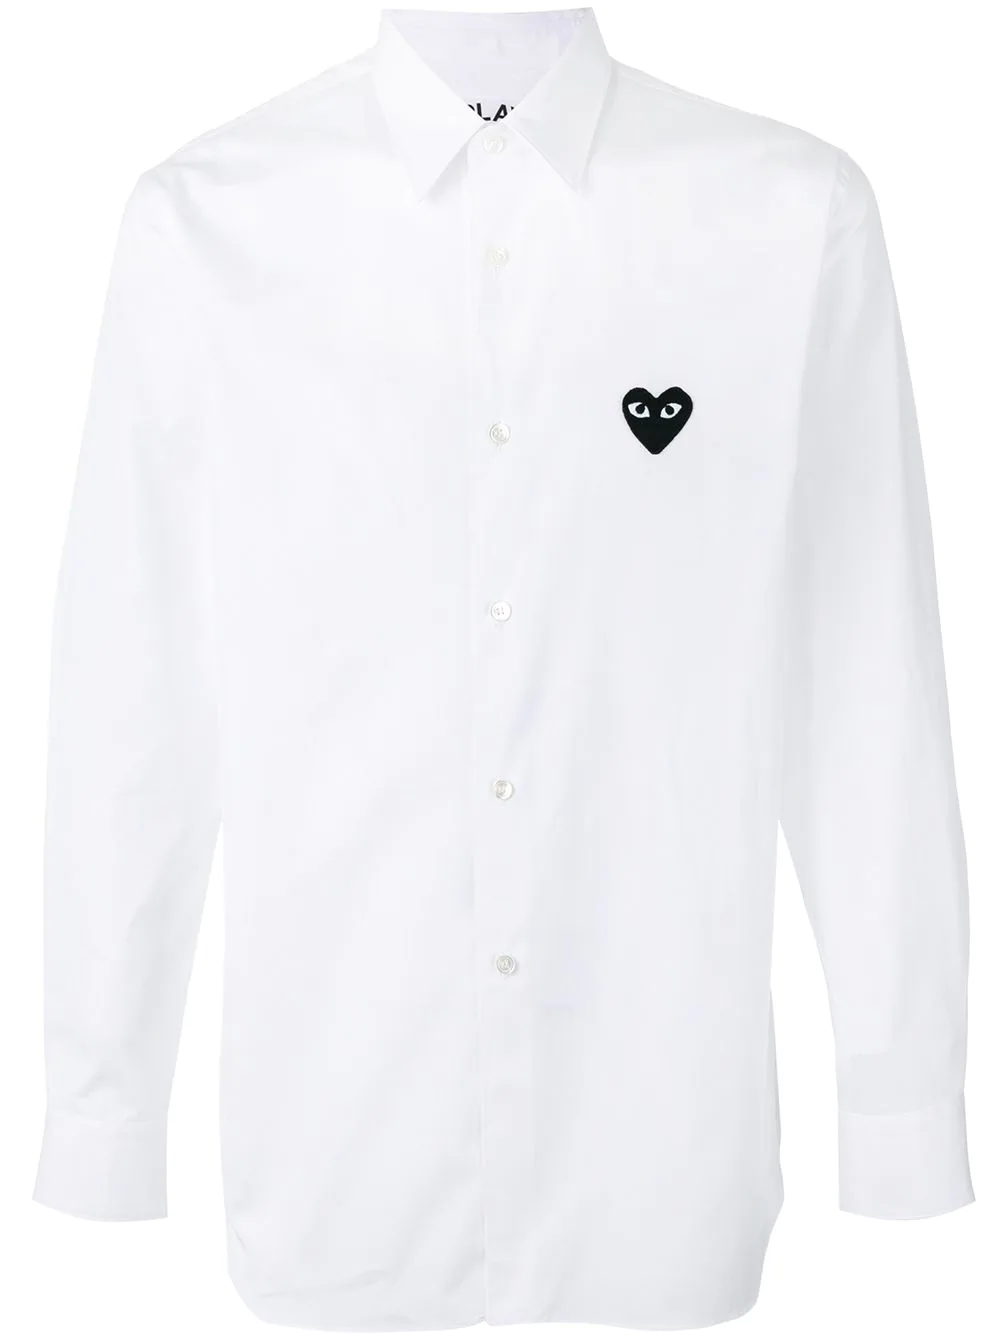 Image 1 of black heart embroidered shirt 